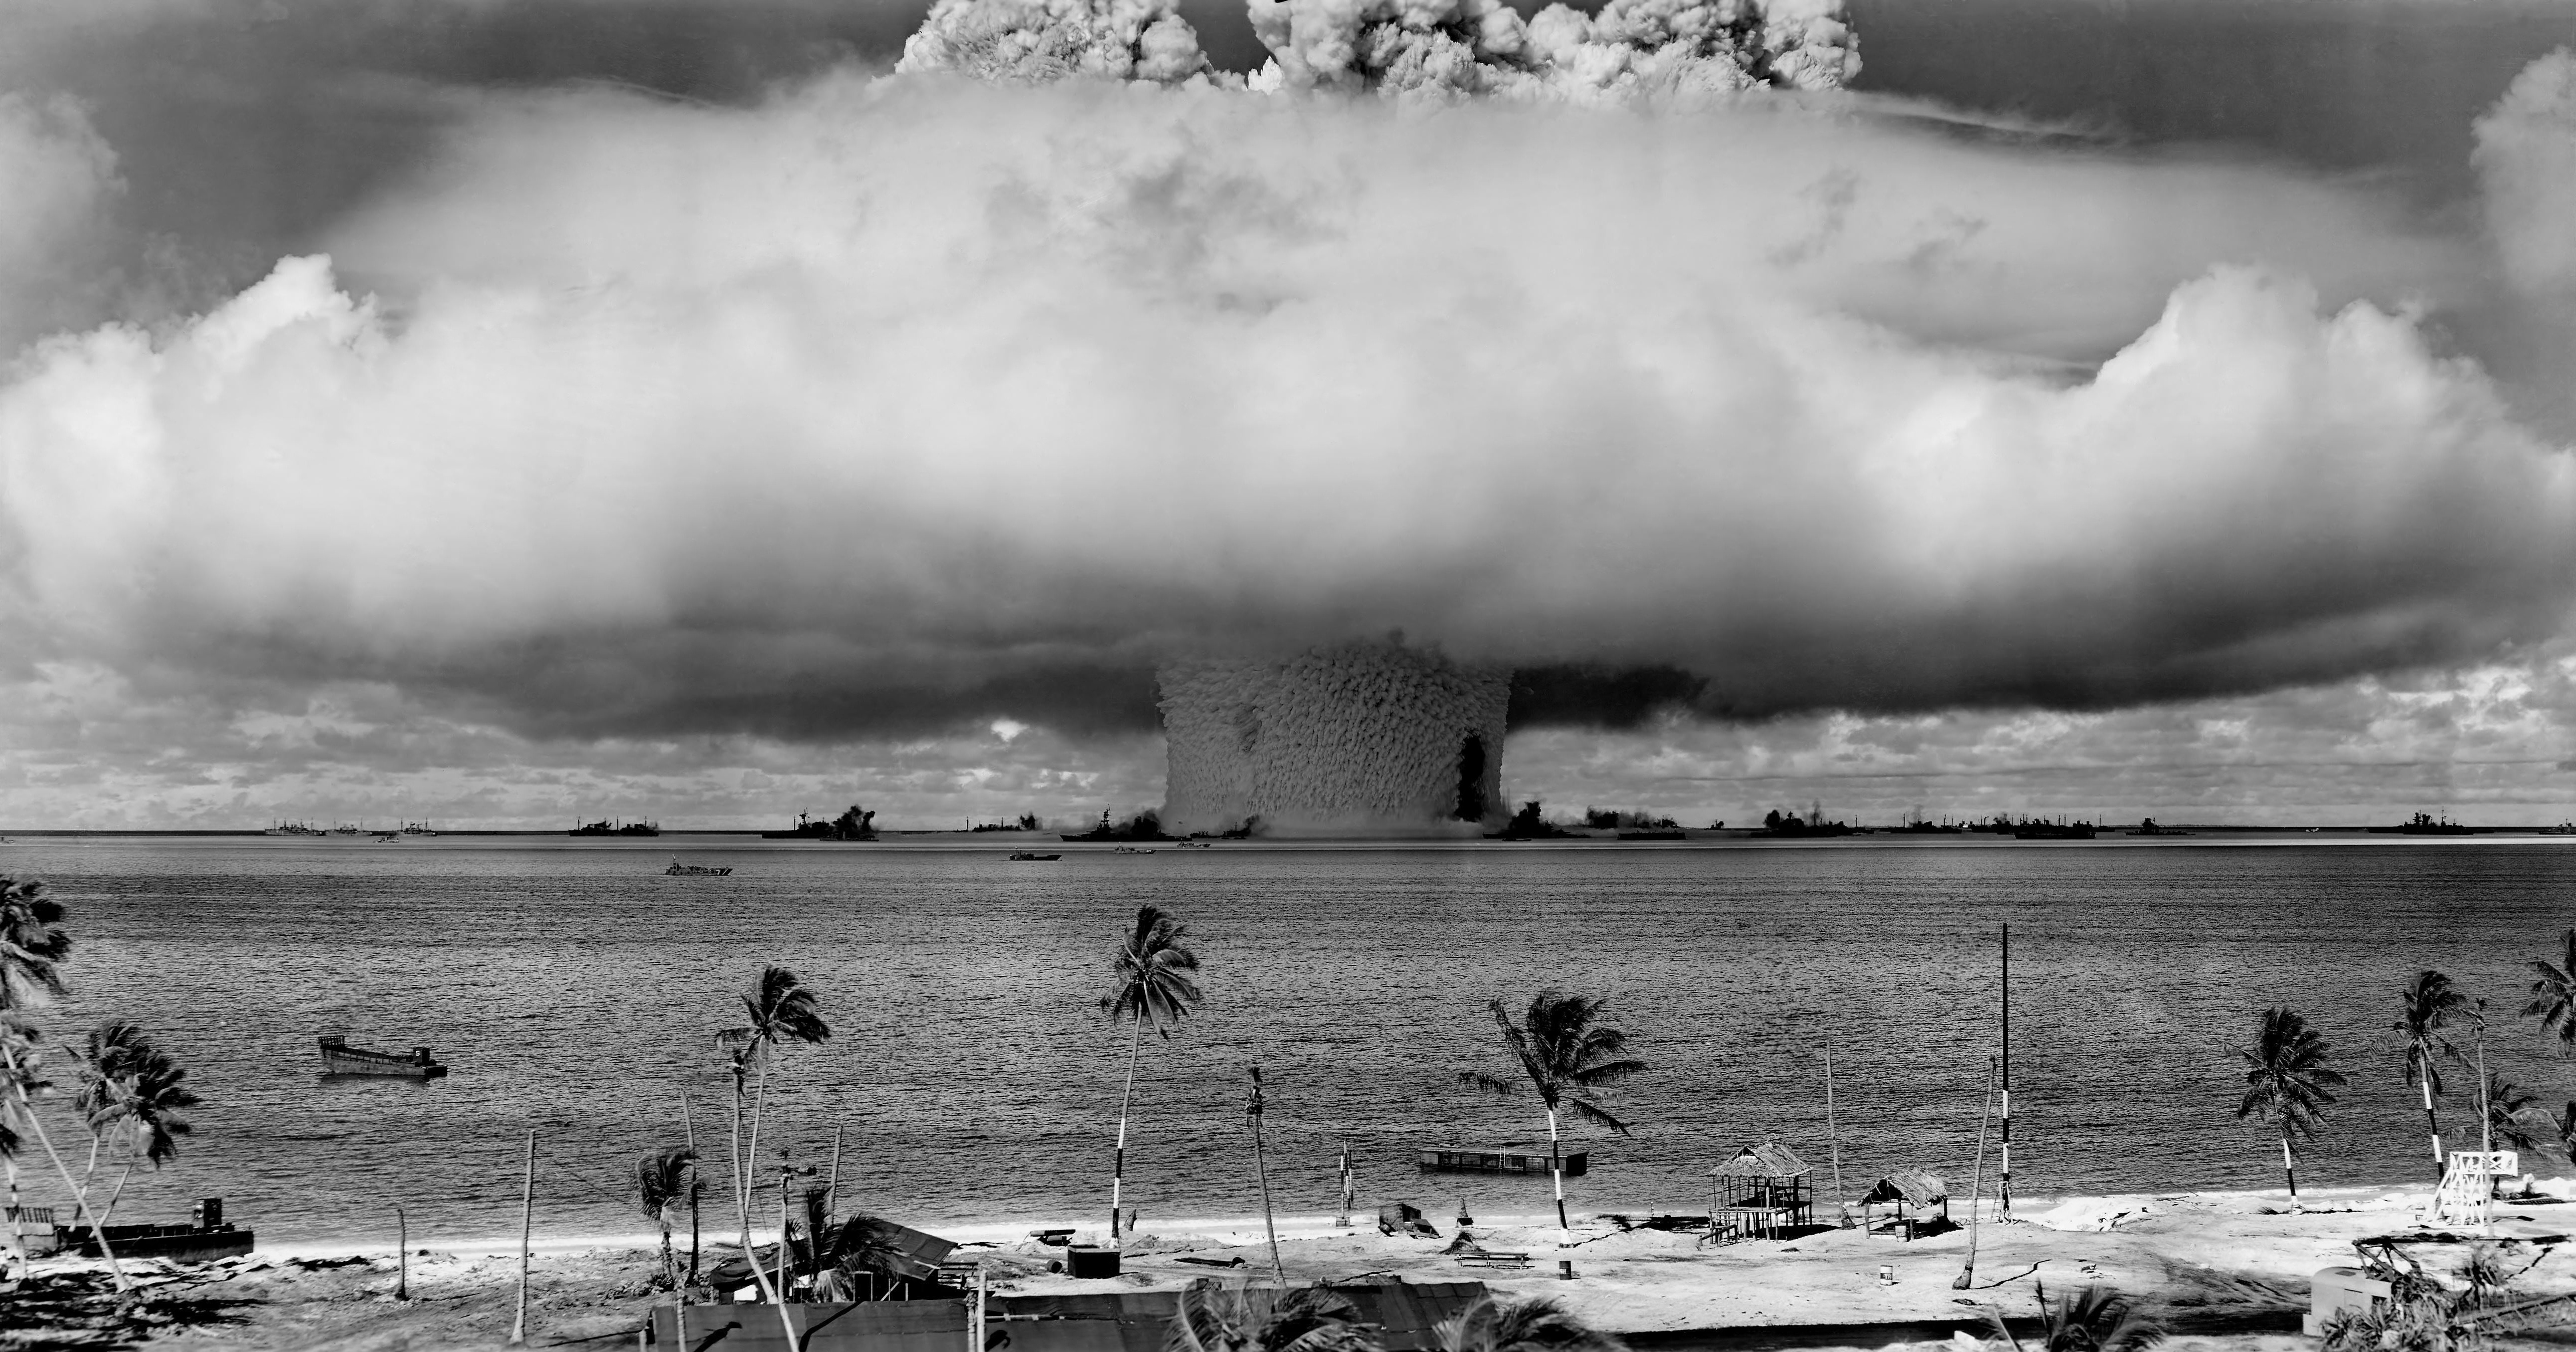 How to mitigate the effects of extreme variation. Picture of nuclear explosion.